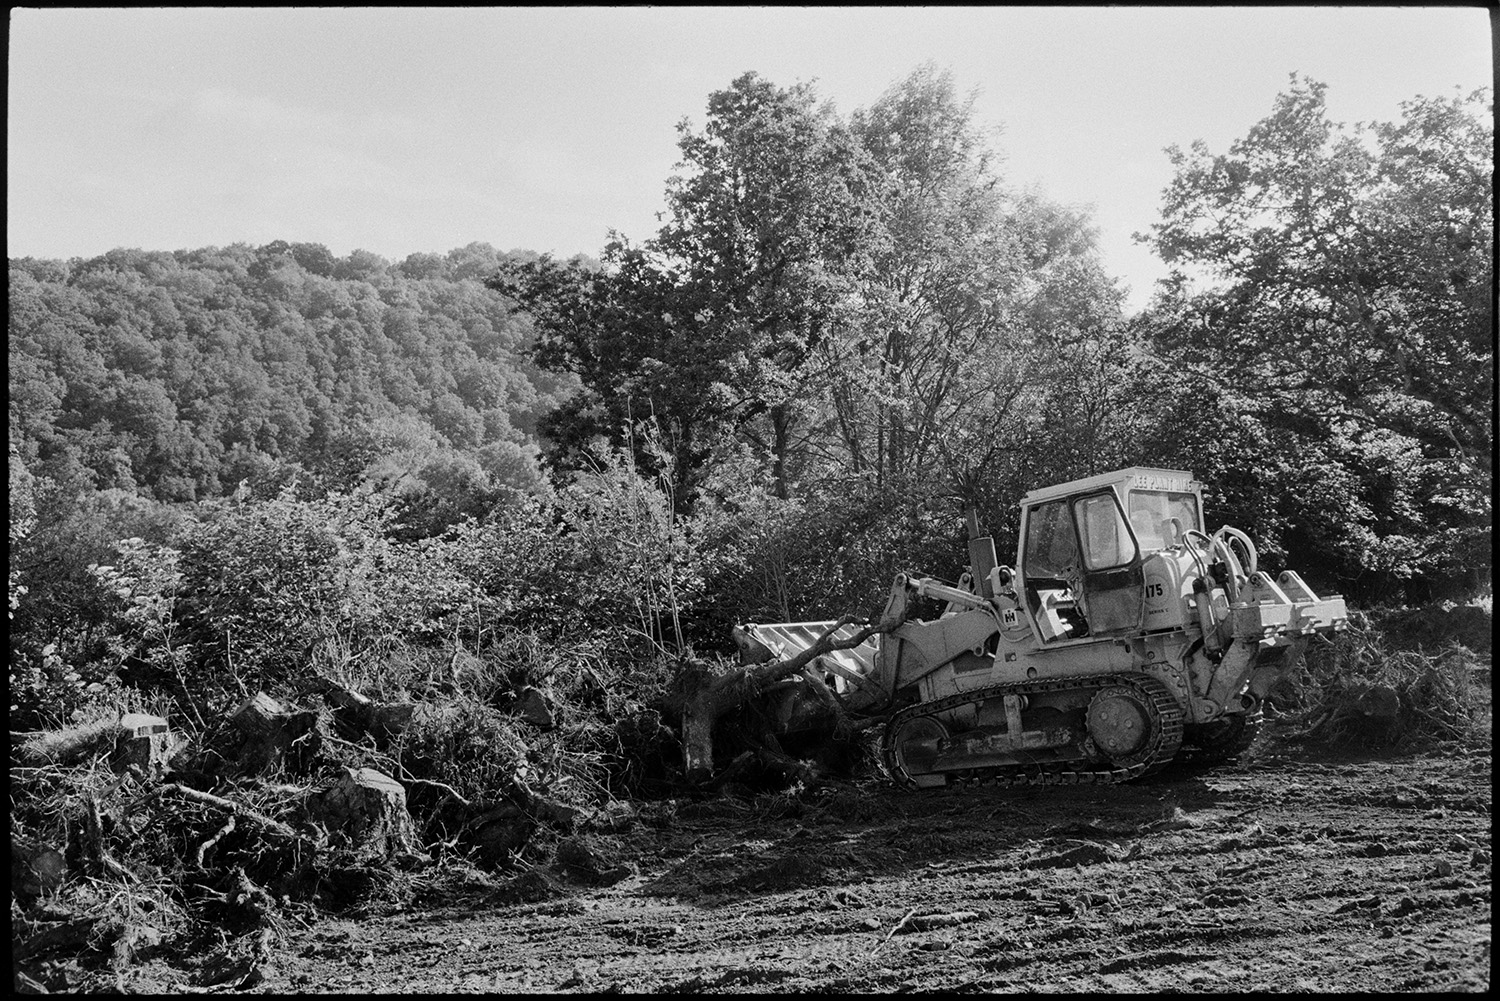 Bulldozer clearing trees from small wood to make pasture.
[A bulldozer clearing trees for pasture on the edge of woodland above Millhams, Dolton. More woodland can be seen in the background.]